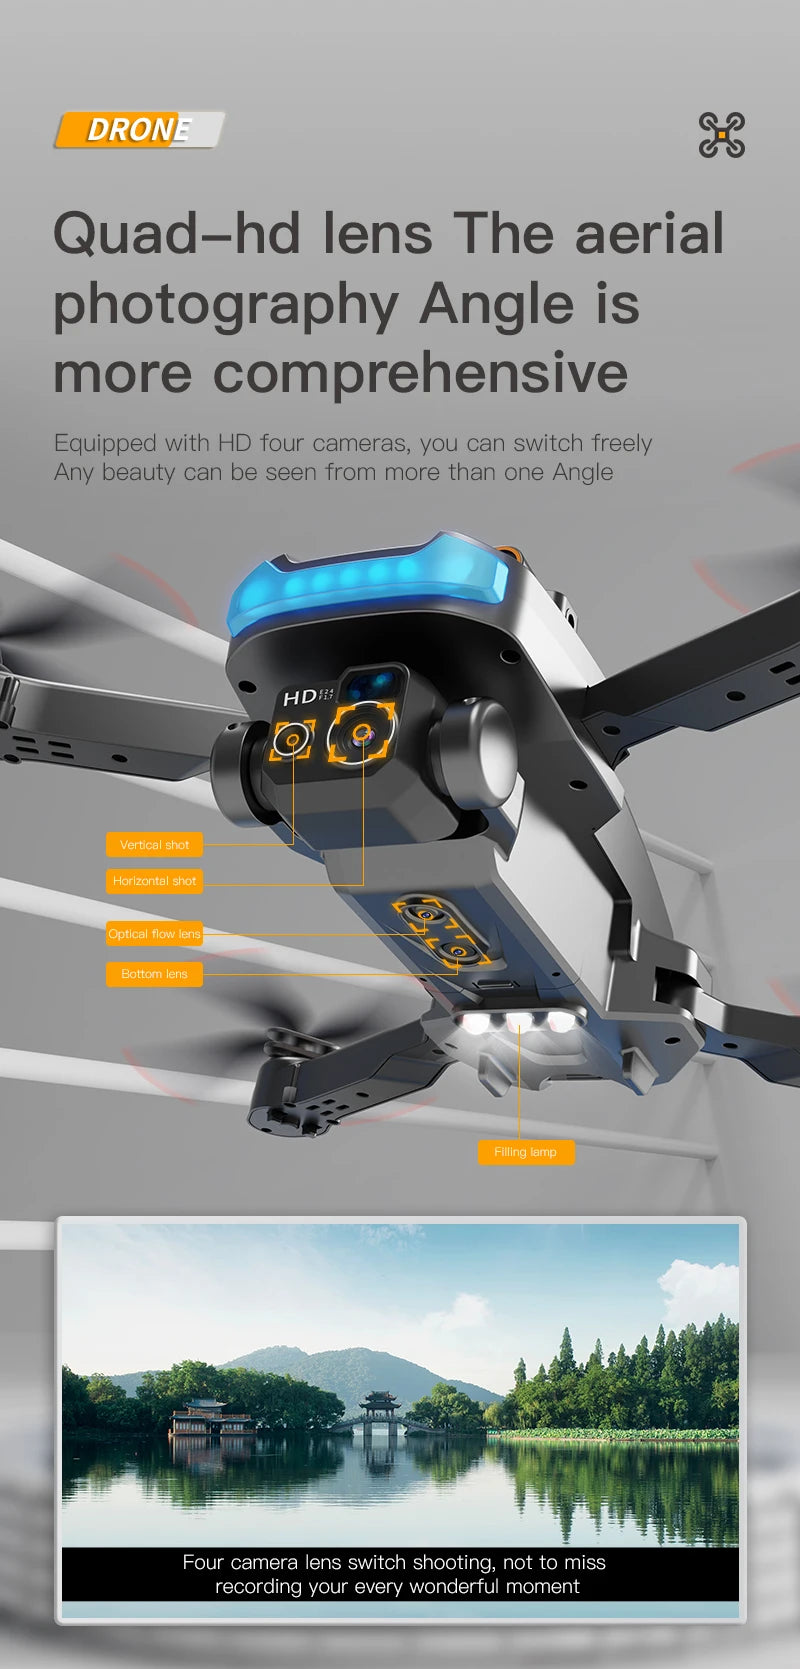 P15 Drone, dronl quad-hd lens the aerial photography angle is more